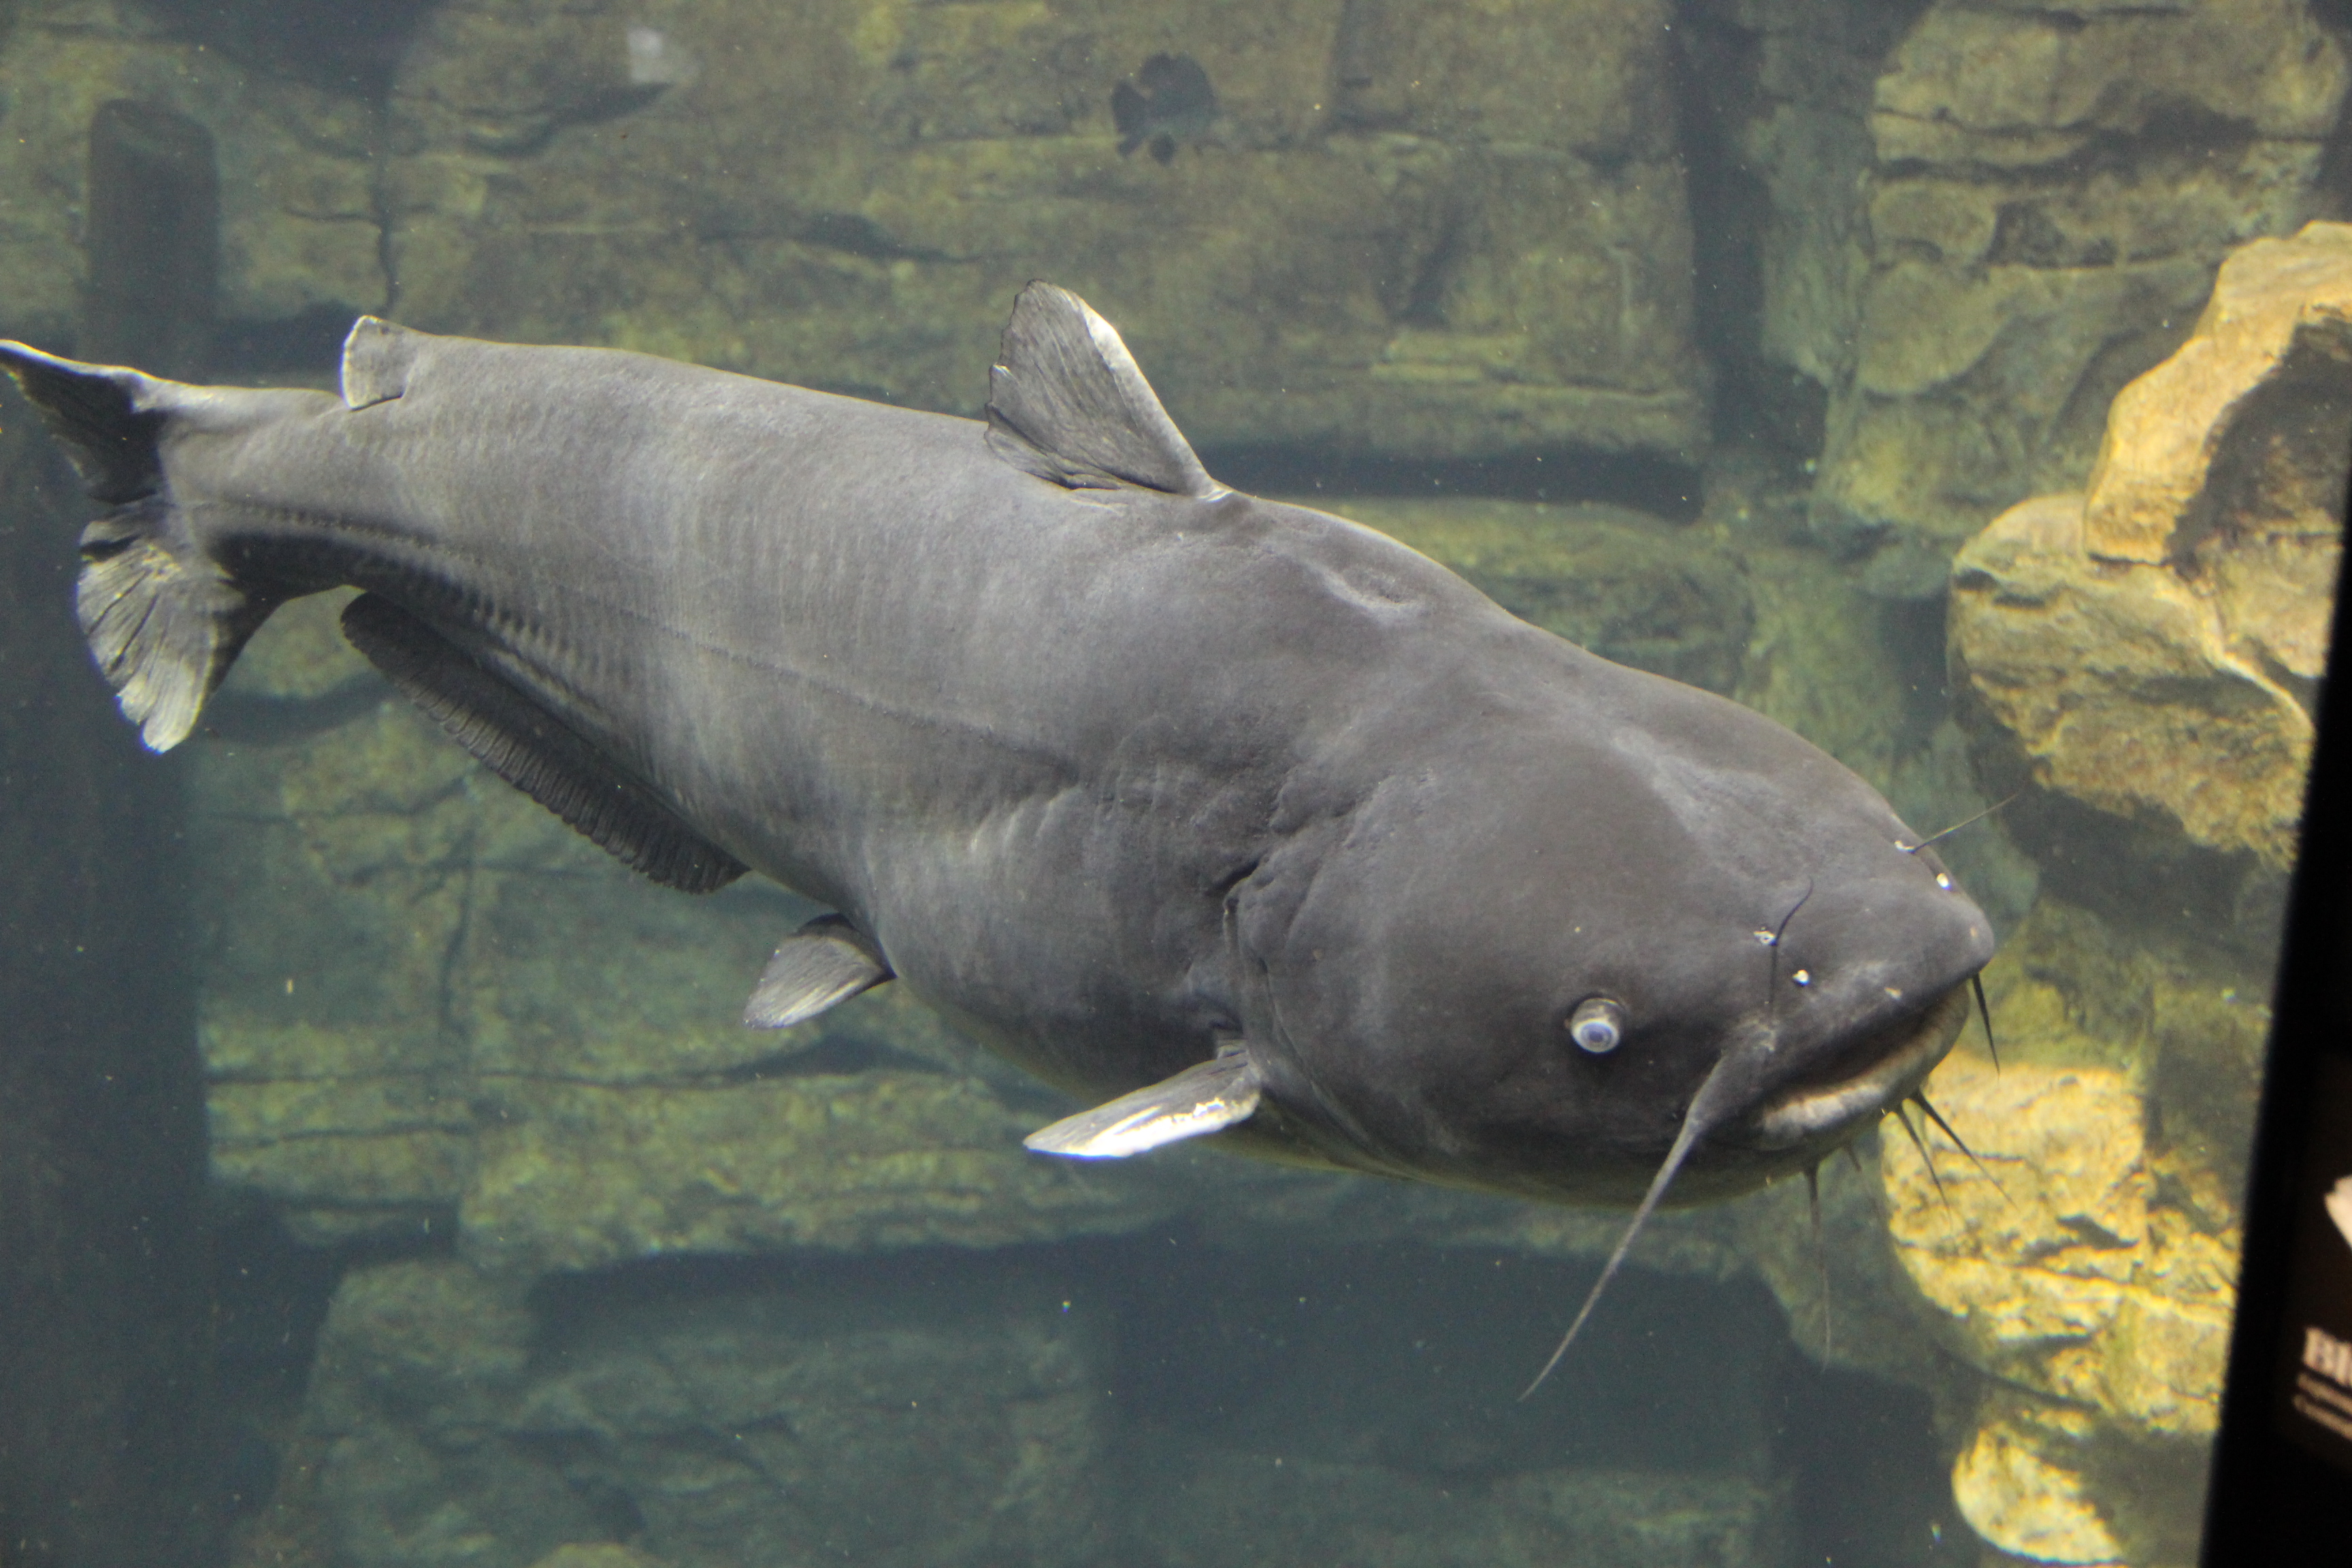 Fishing for blue catfish is good for the Bay, but be careful when